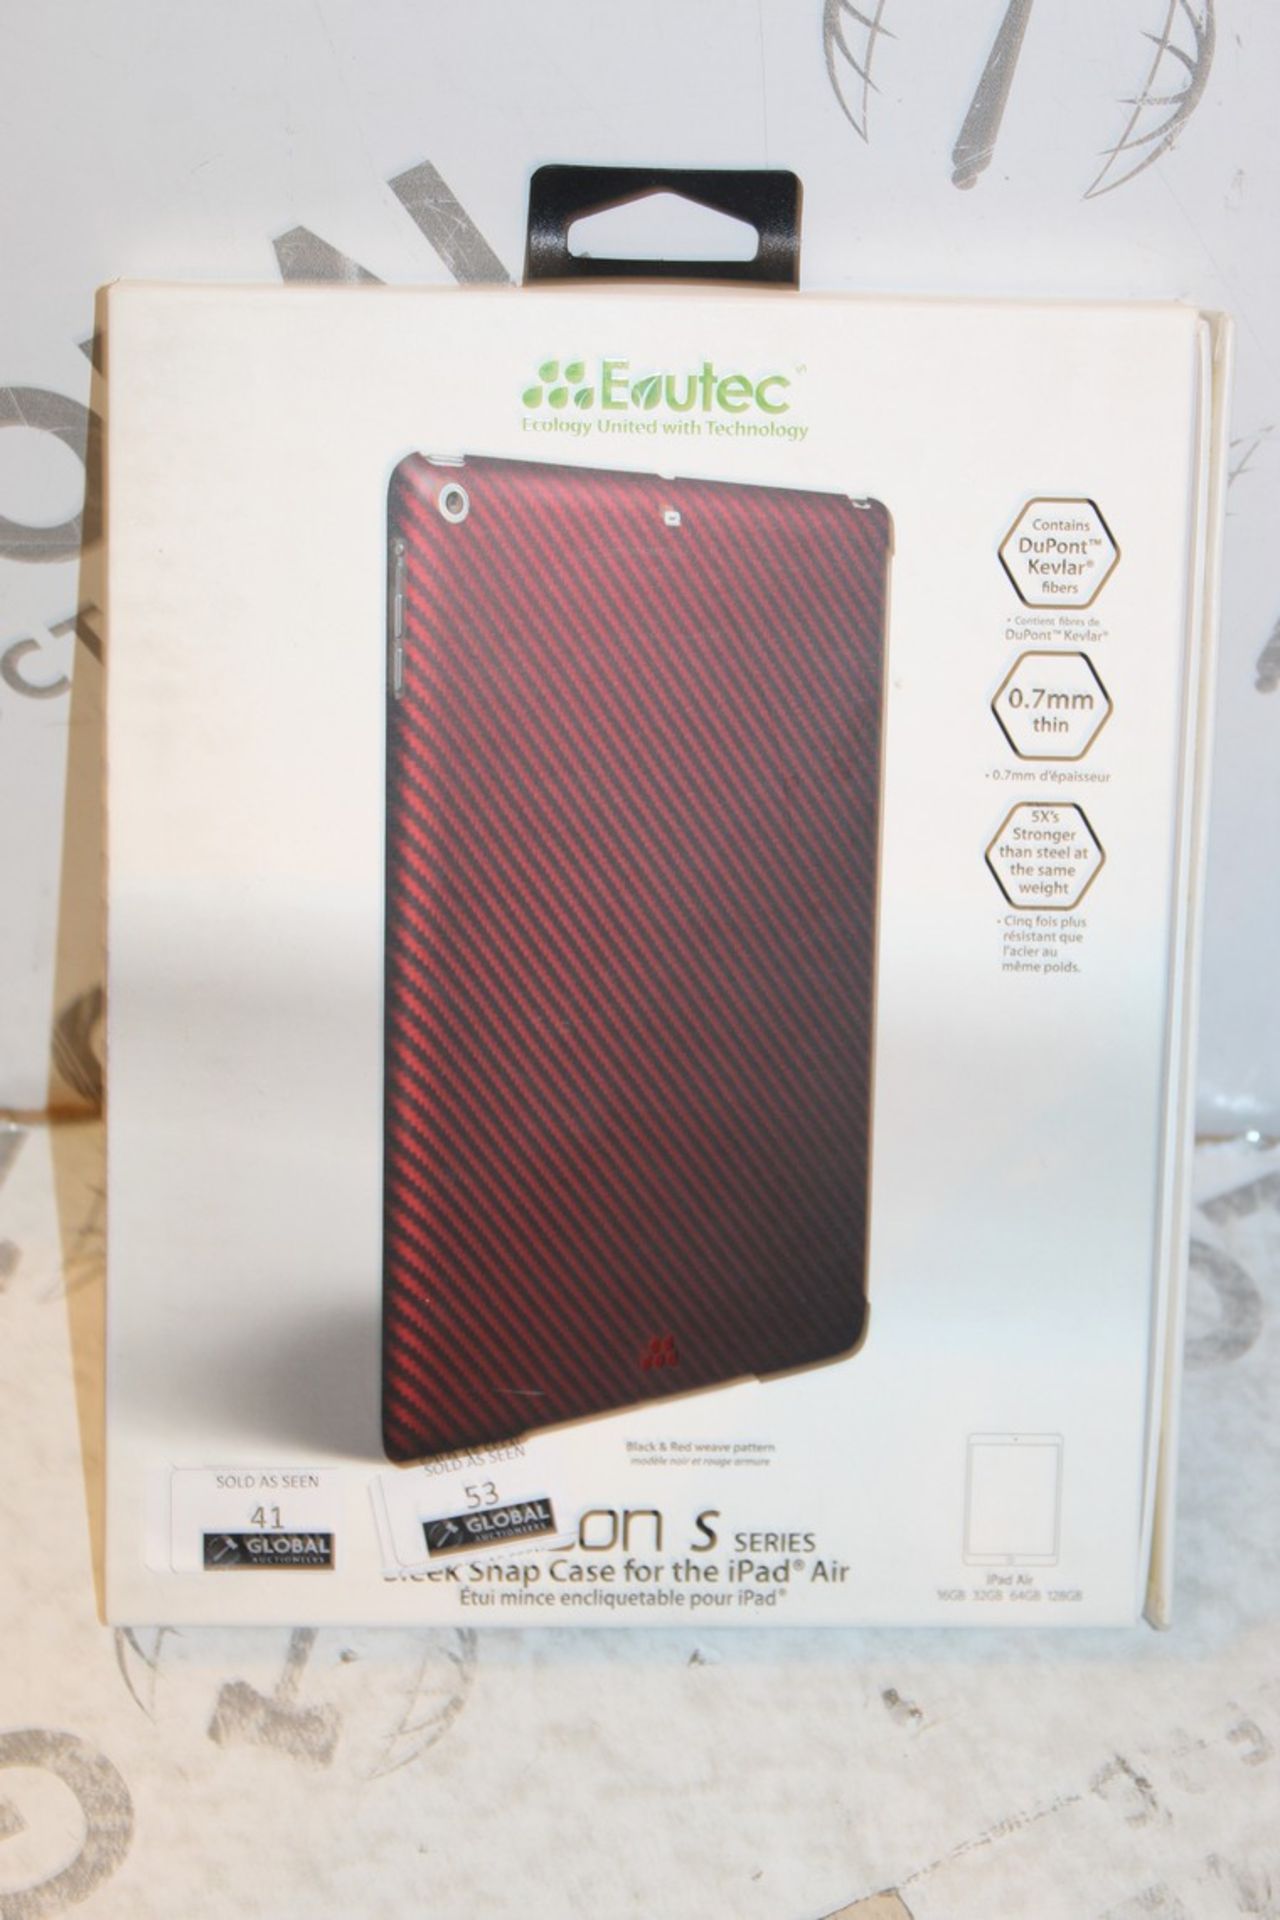 6 Brand New Evutec Carbon S Snap on Cases for Ipad Air Combined RRP £70 (Appraisals Available Upon